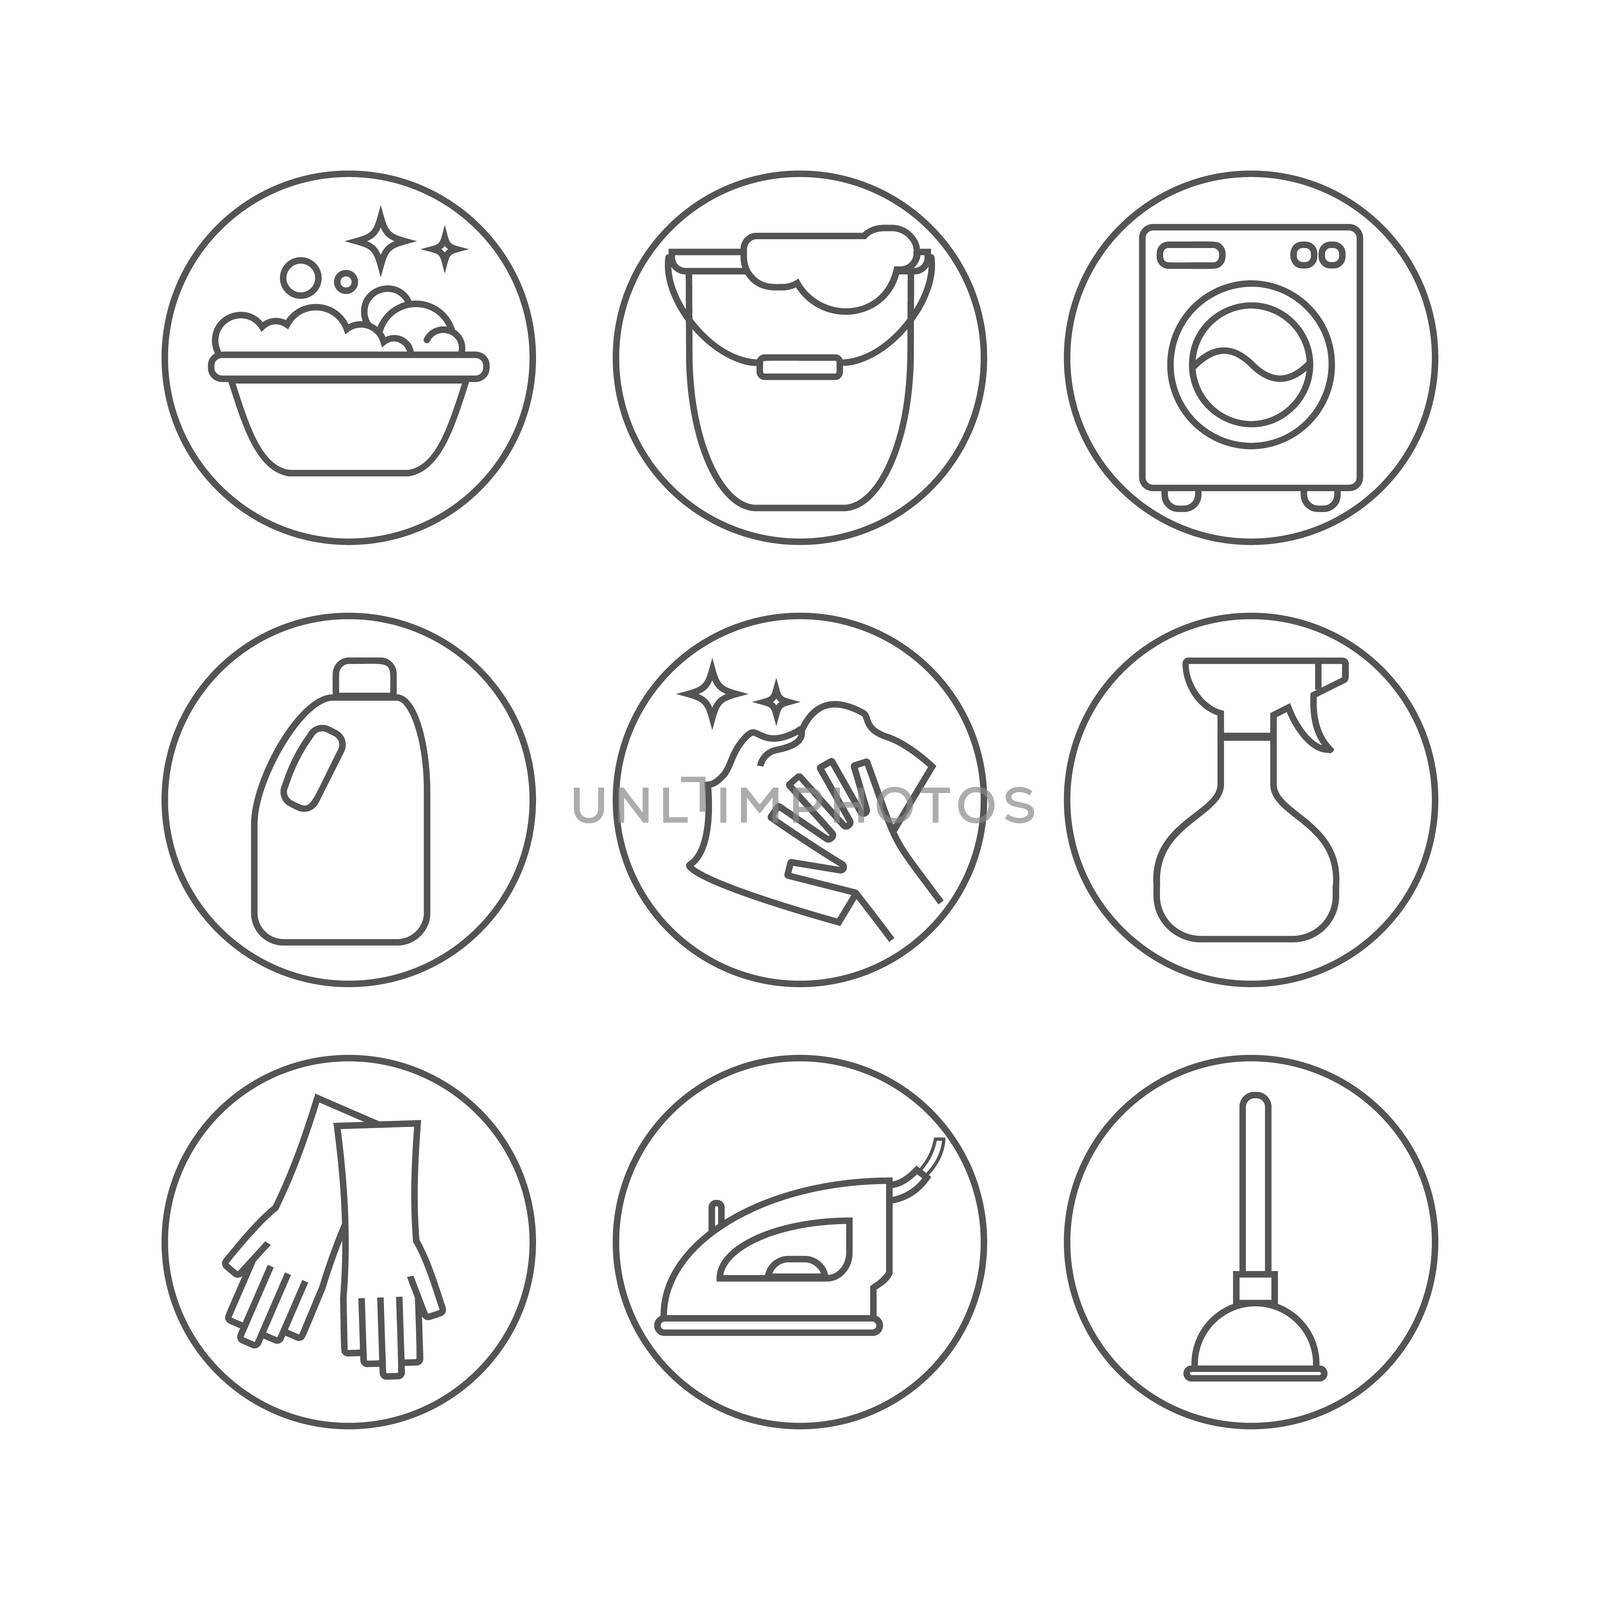 Clean, wash line icons. Washing machine, sponge, mop, iron, vacuum cleaner, shovel and other cleaning icon. Order in the house thin linear signs for cleaning service.